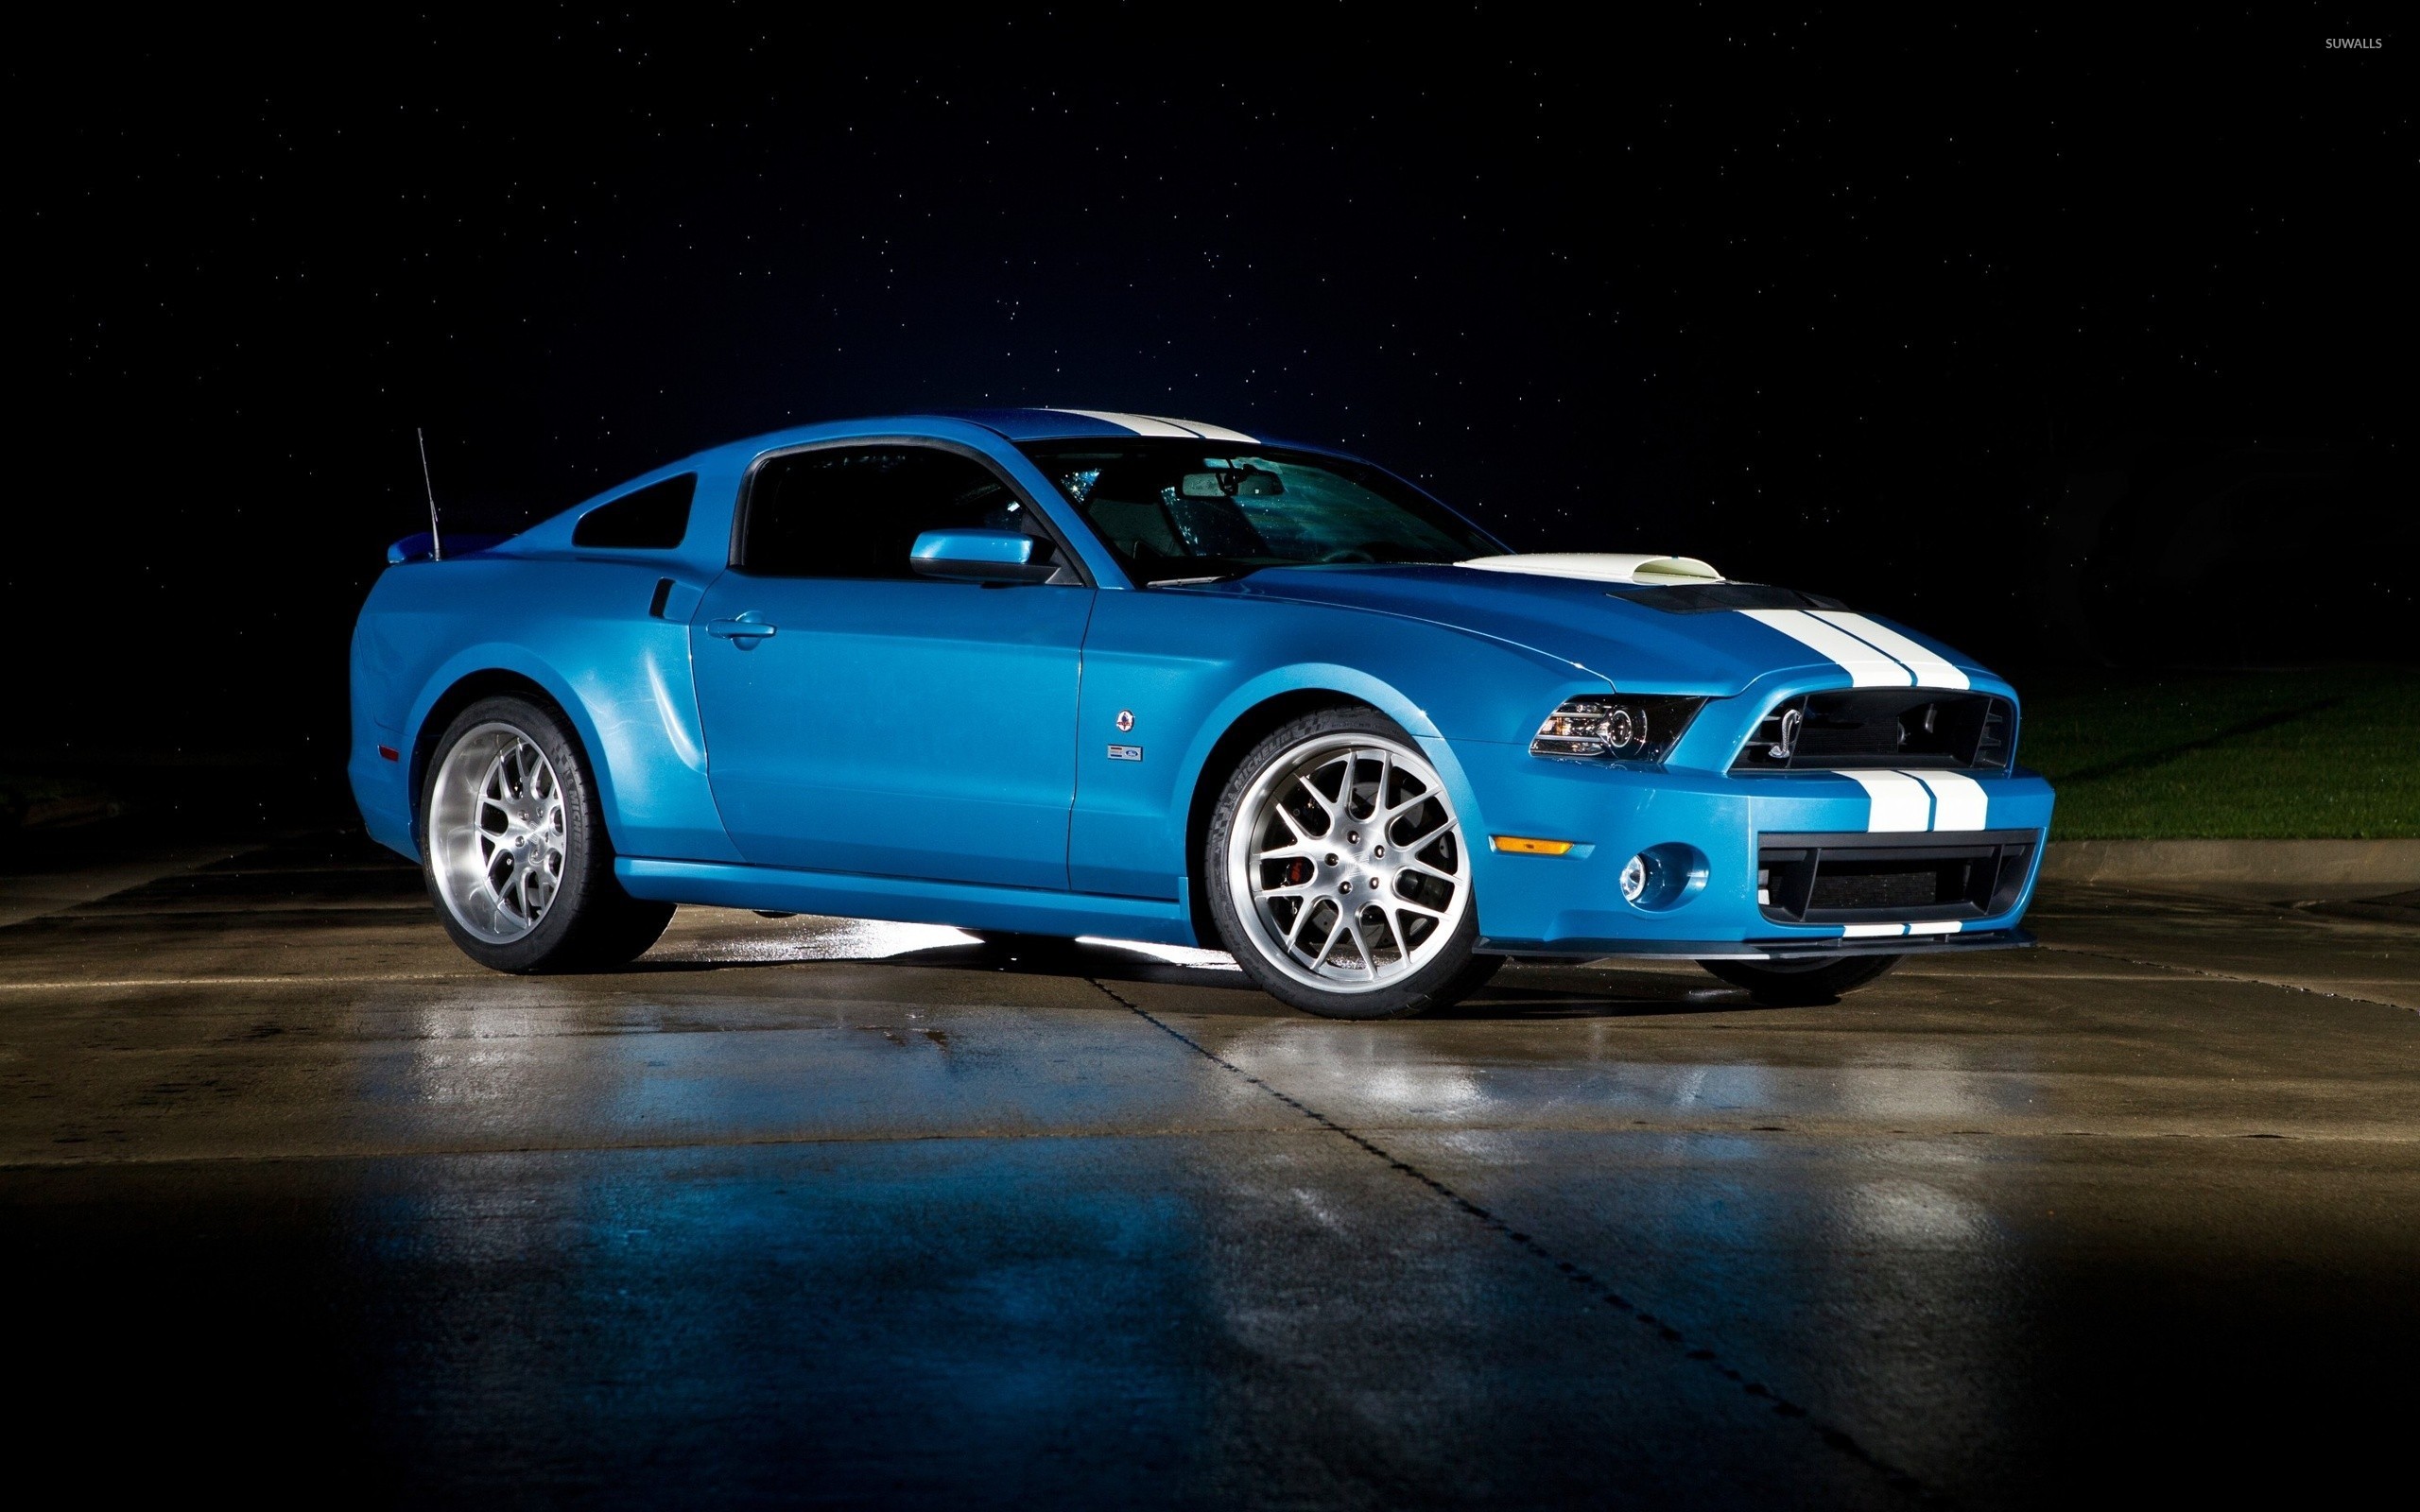 Ford Shelby GT500 wallpaper - Car wallpapers - #29024